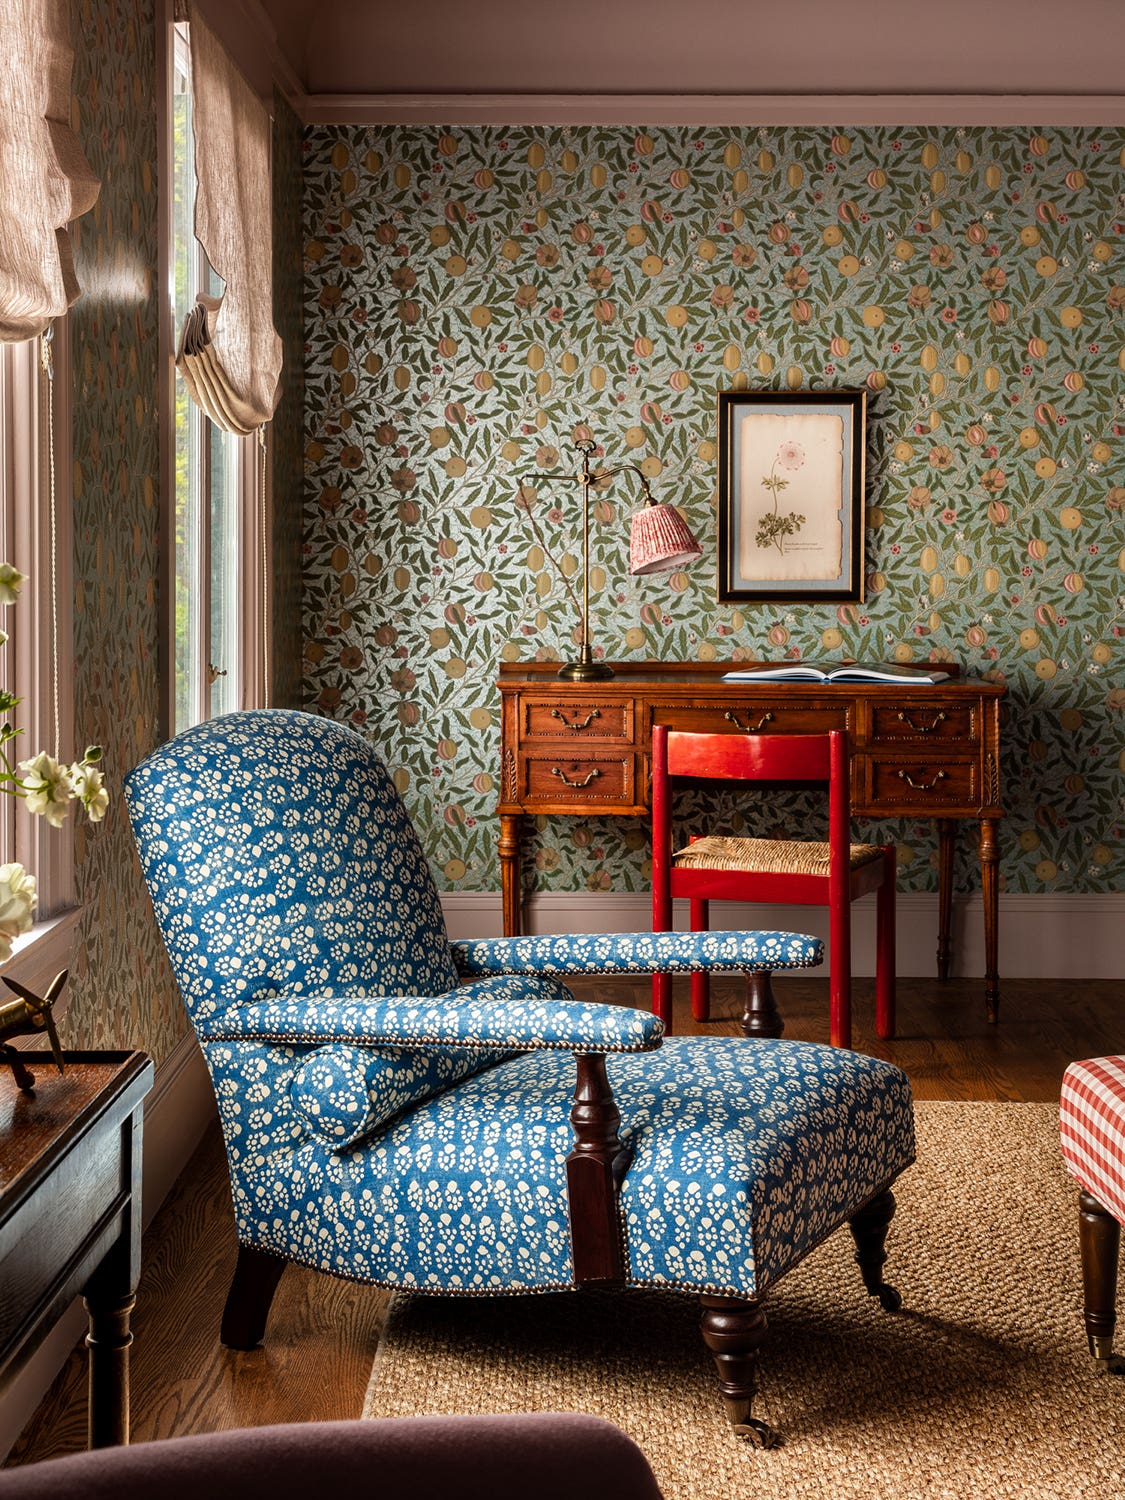 Living room with patterned chair and wallpaper